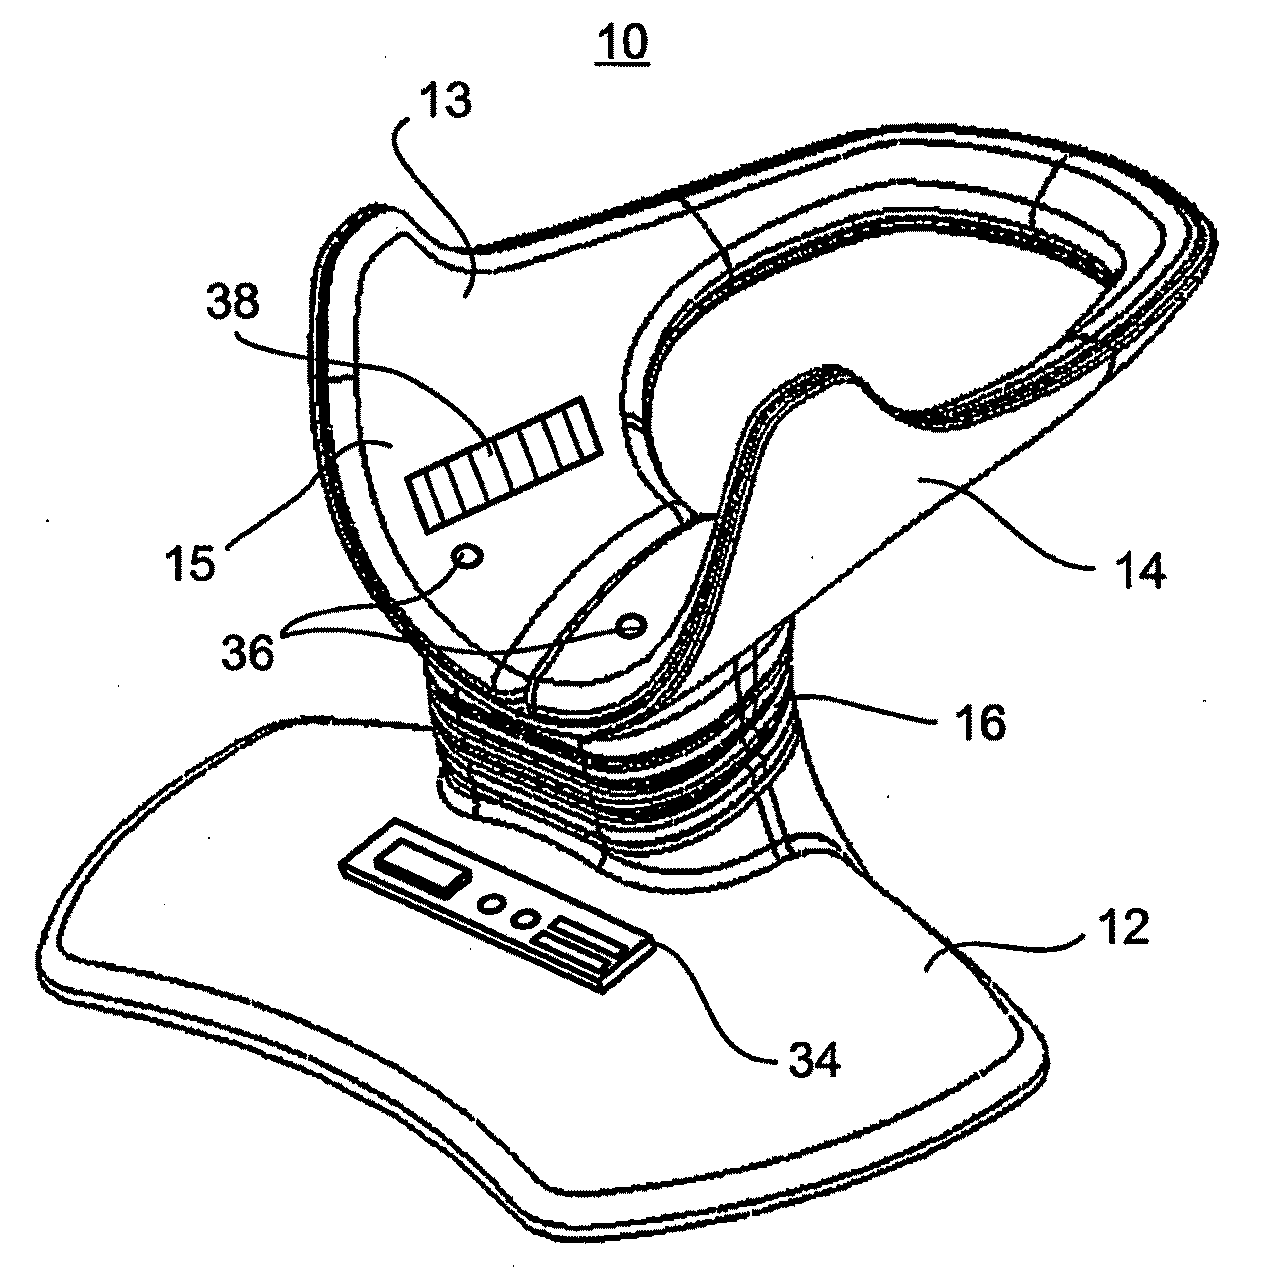 Device and Method for Treating Neck Tension or Neck Injury